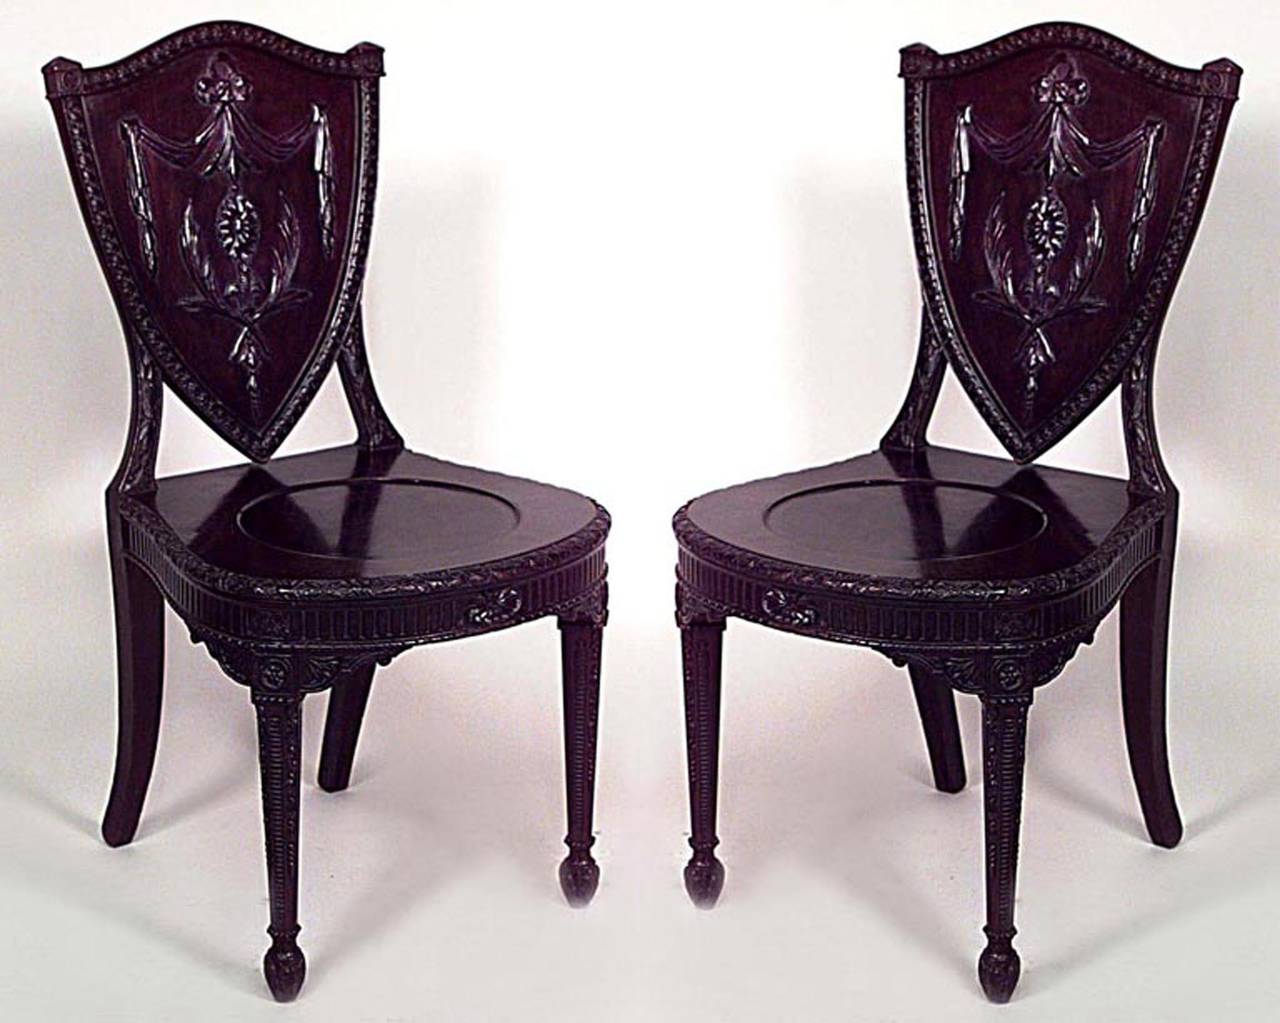 Pair of English Adam style (19th Cent) mahogany shield back (hall) side chairs with round carved seat.
